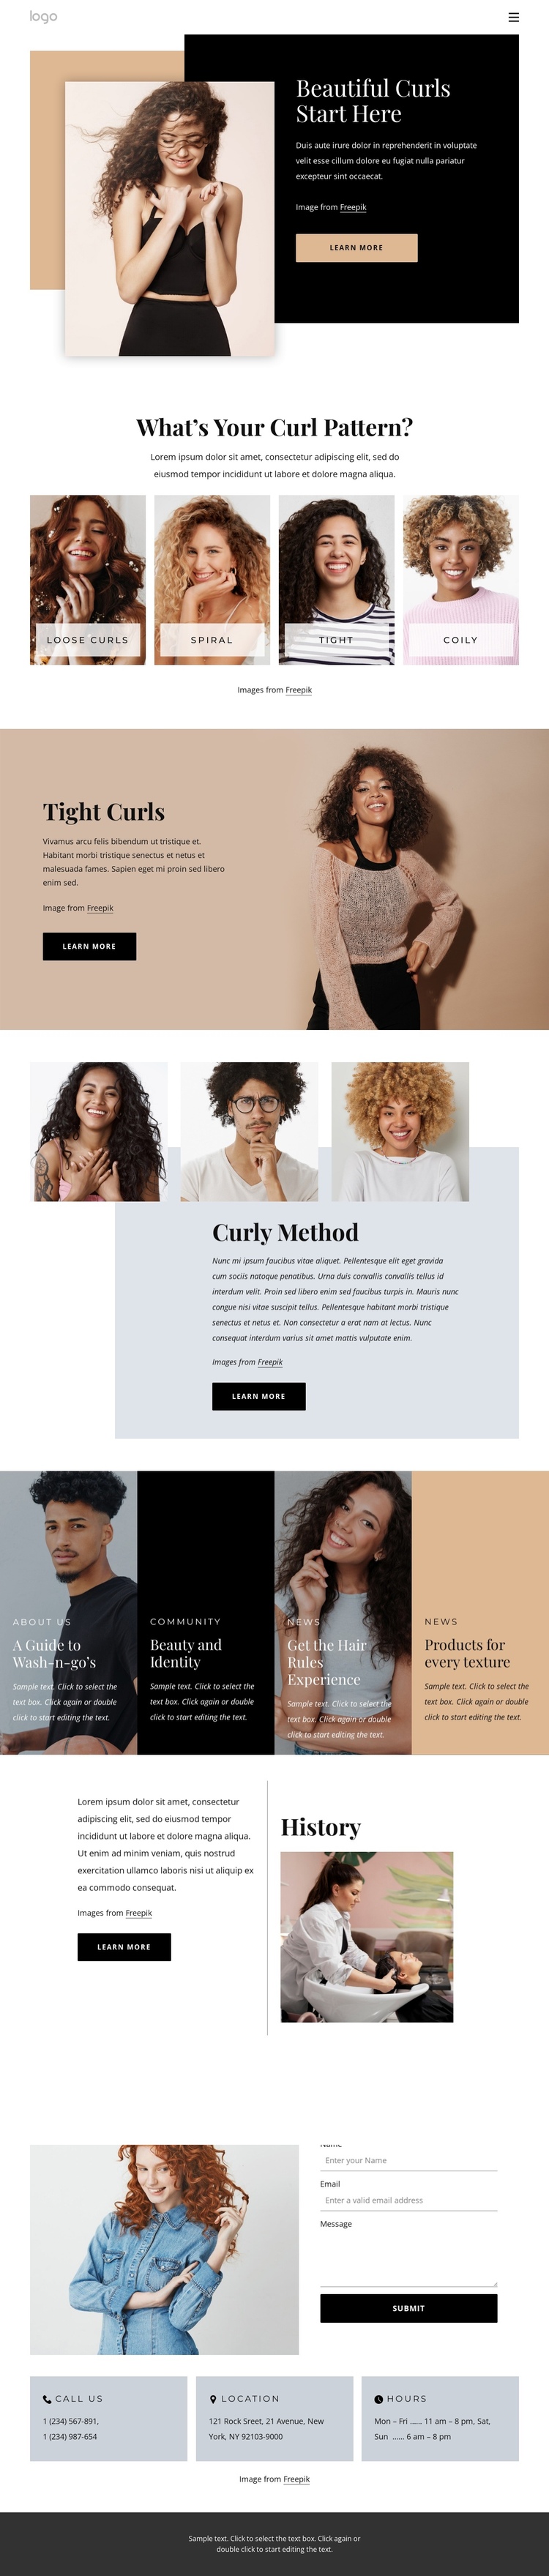 Bring out the best in your curls Website Builder Software